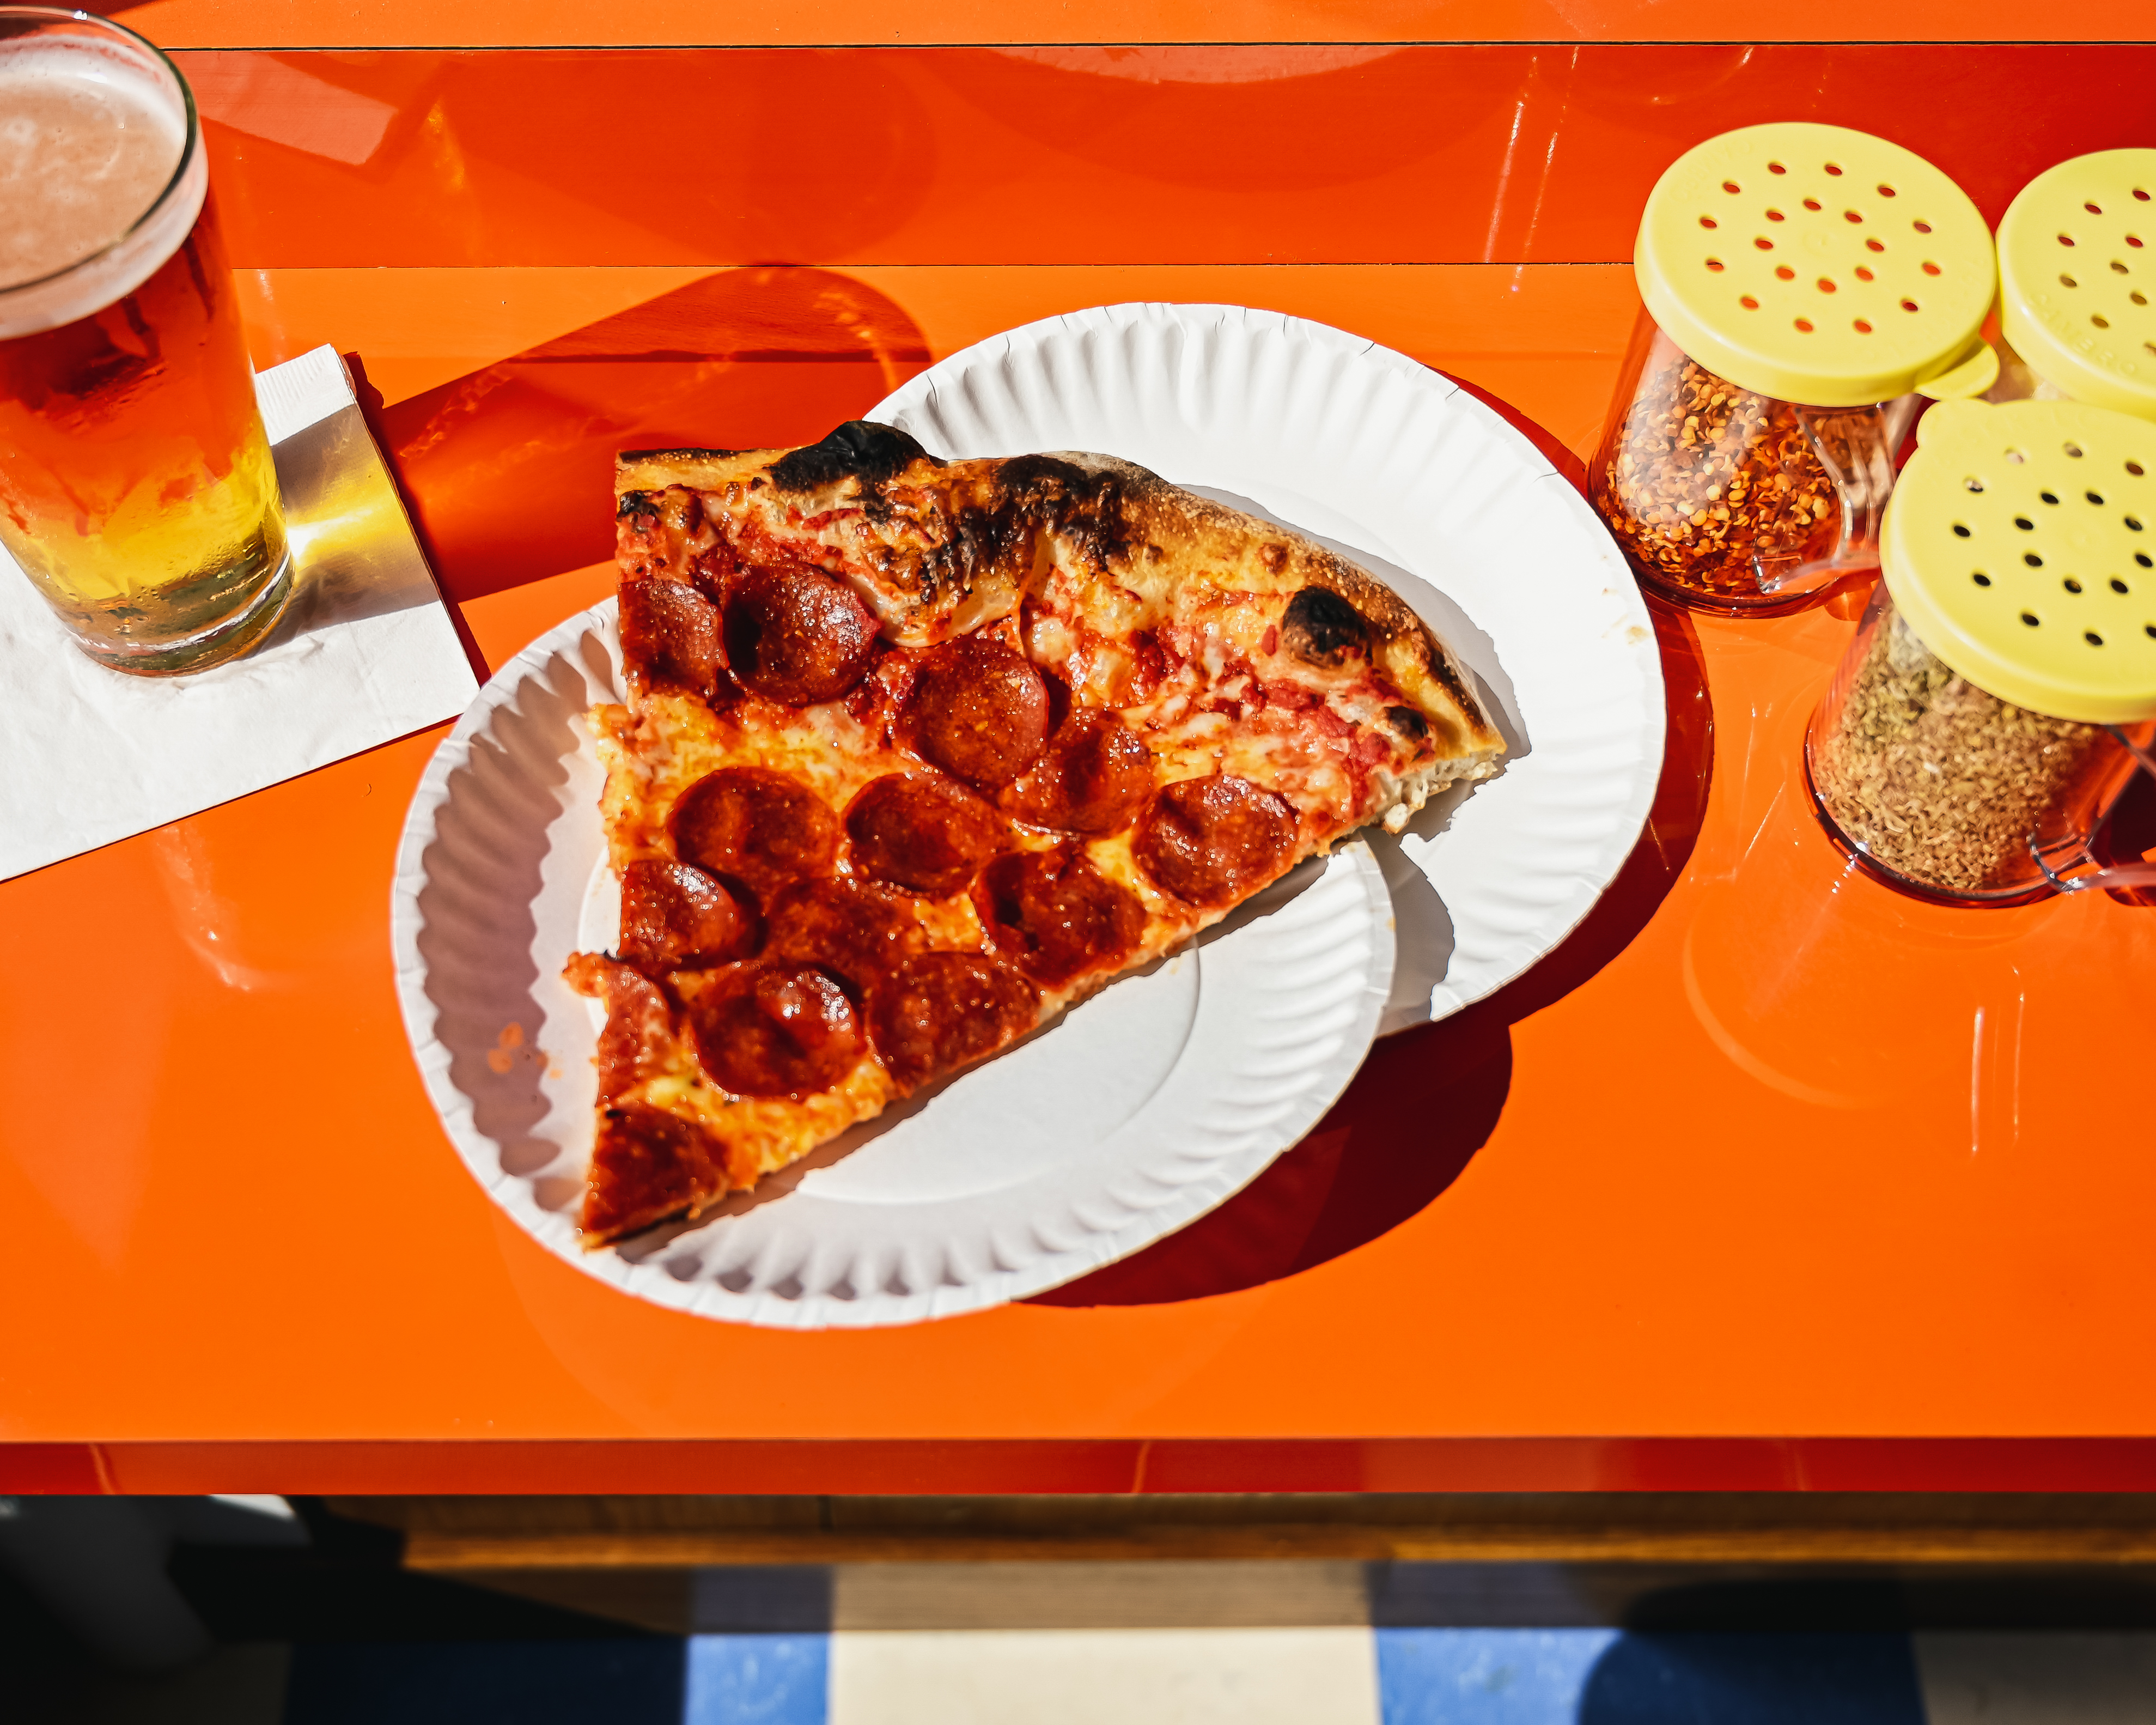 A pepperoni pizza slice on two white paper plates on an orange table with a glass of beer to the left and pizza topping containers to the right